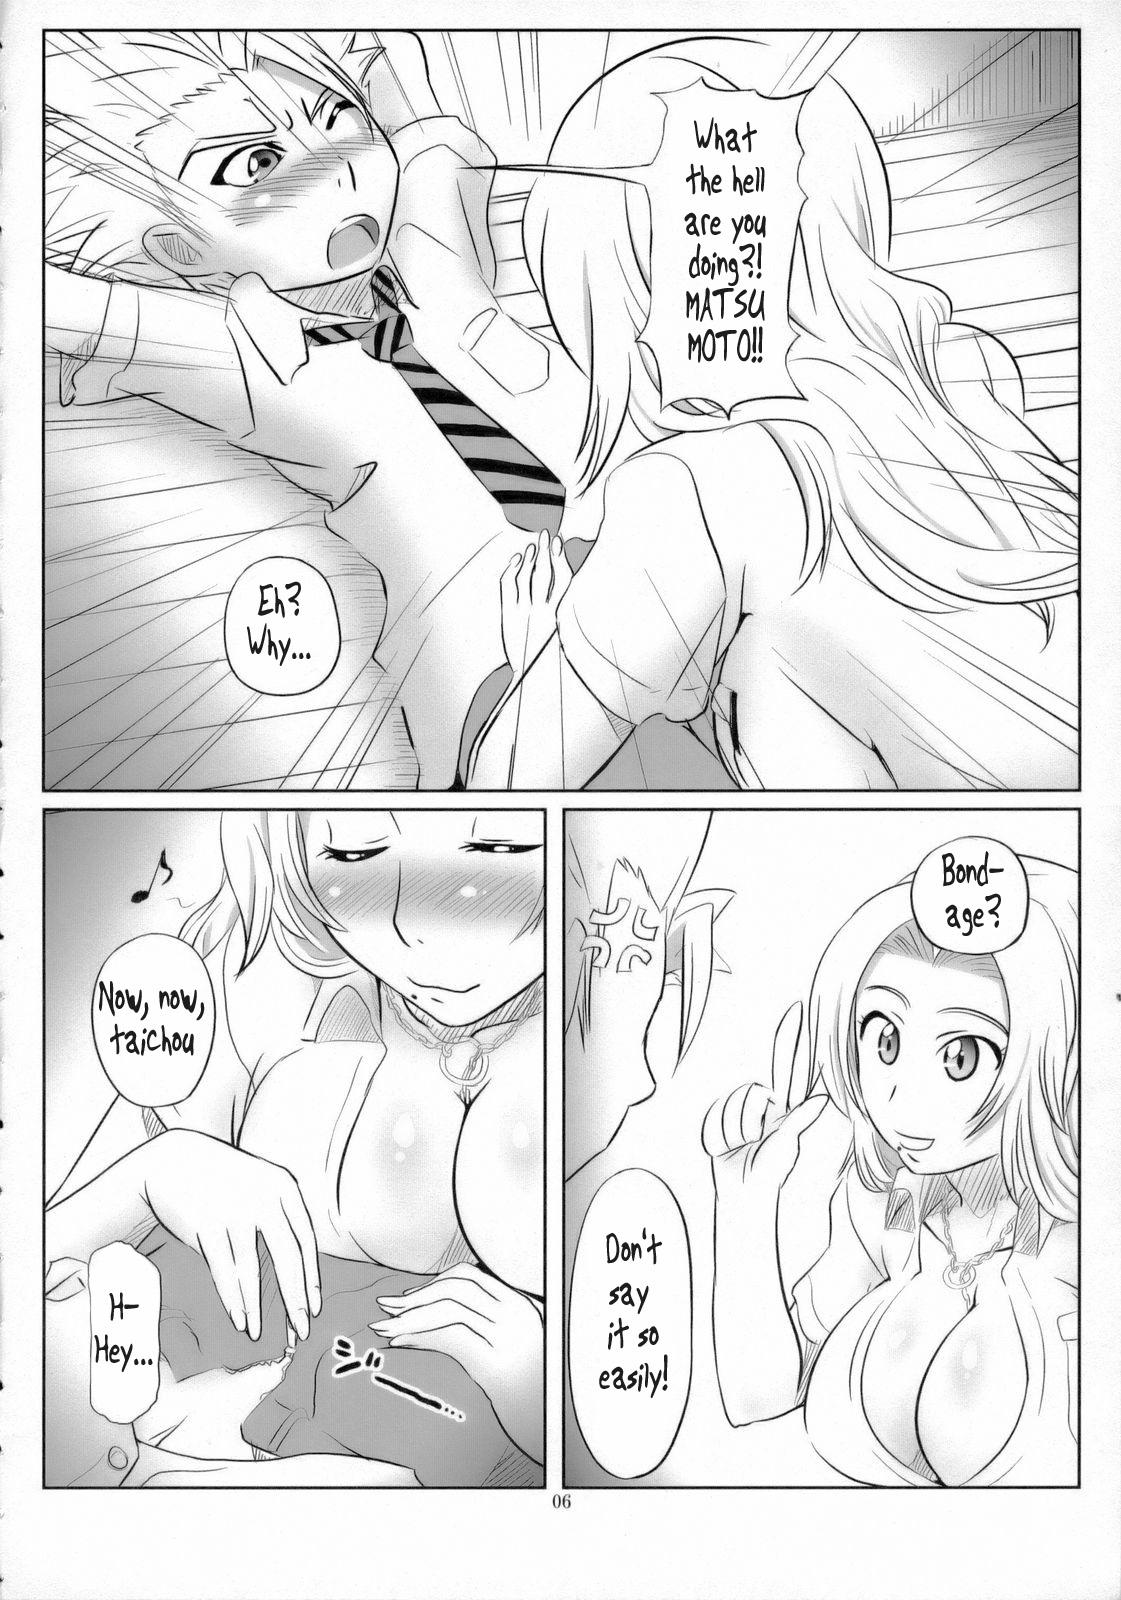 Interacial Seifuku to Iu Na no Kyouki Ni | A Dangerous Weapon Known as A School Uniform 2 - Bleach Officesex - Page 5